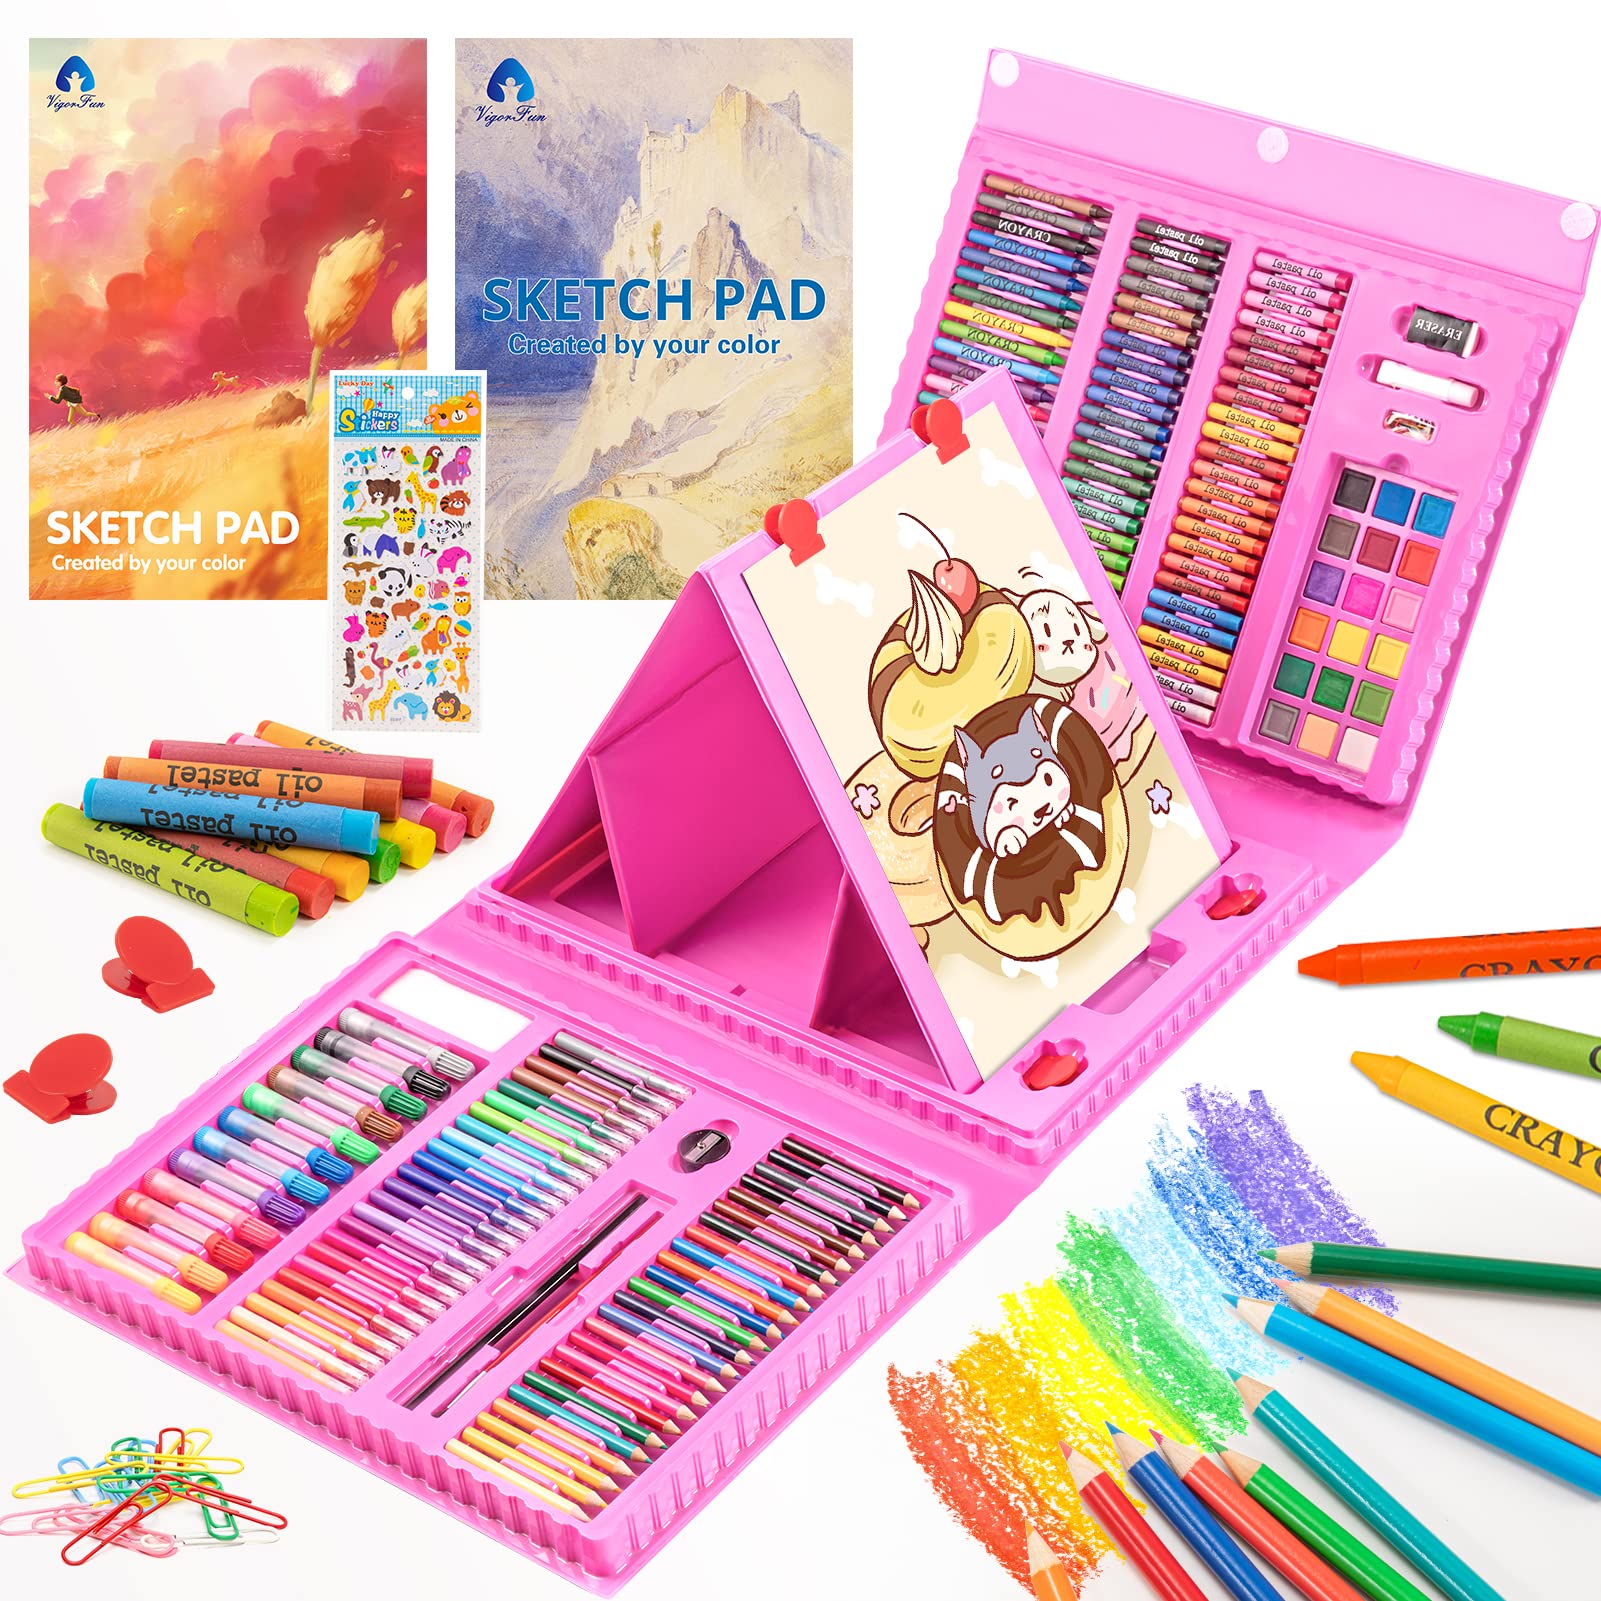 Deluxe Art Set for Kids - 80 Piece Art Supplies Kit w/Wood Case, Creative  Professional Art Box for Teens and Adults, Drawing, Watercolor Painting and